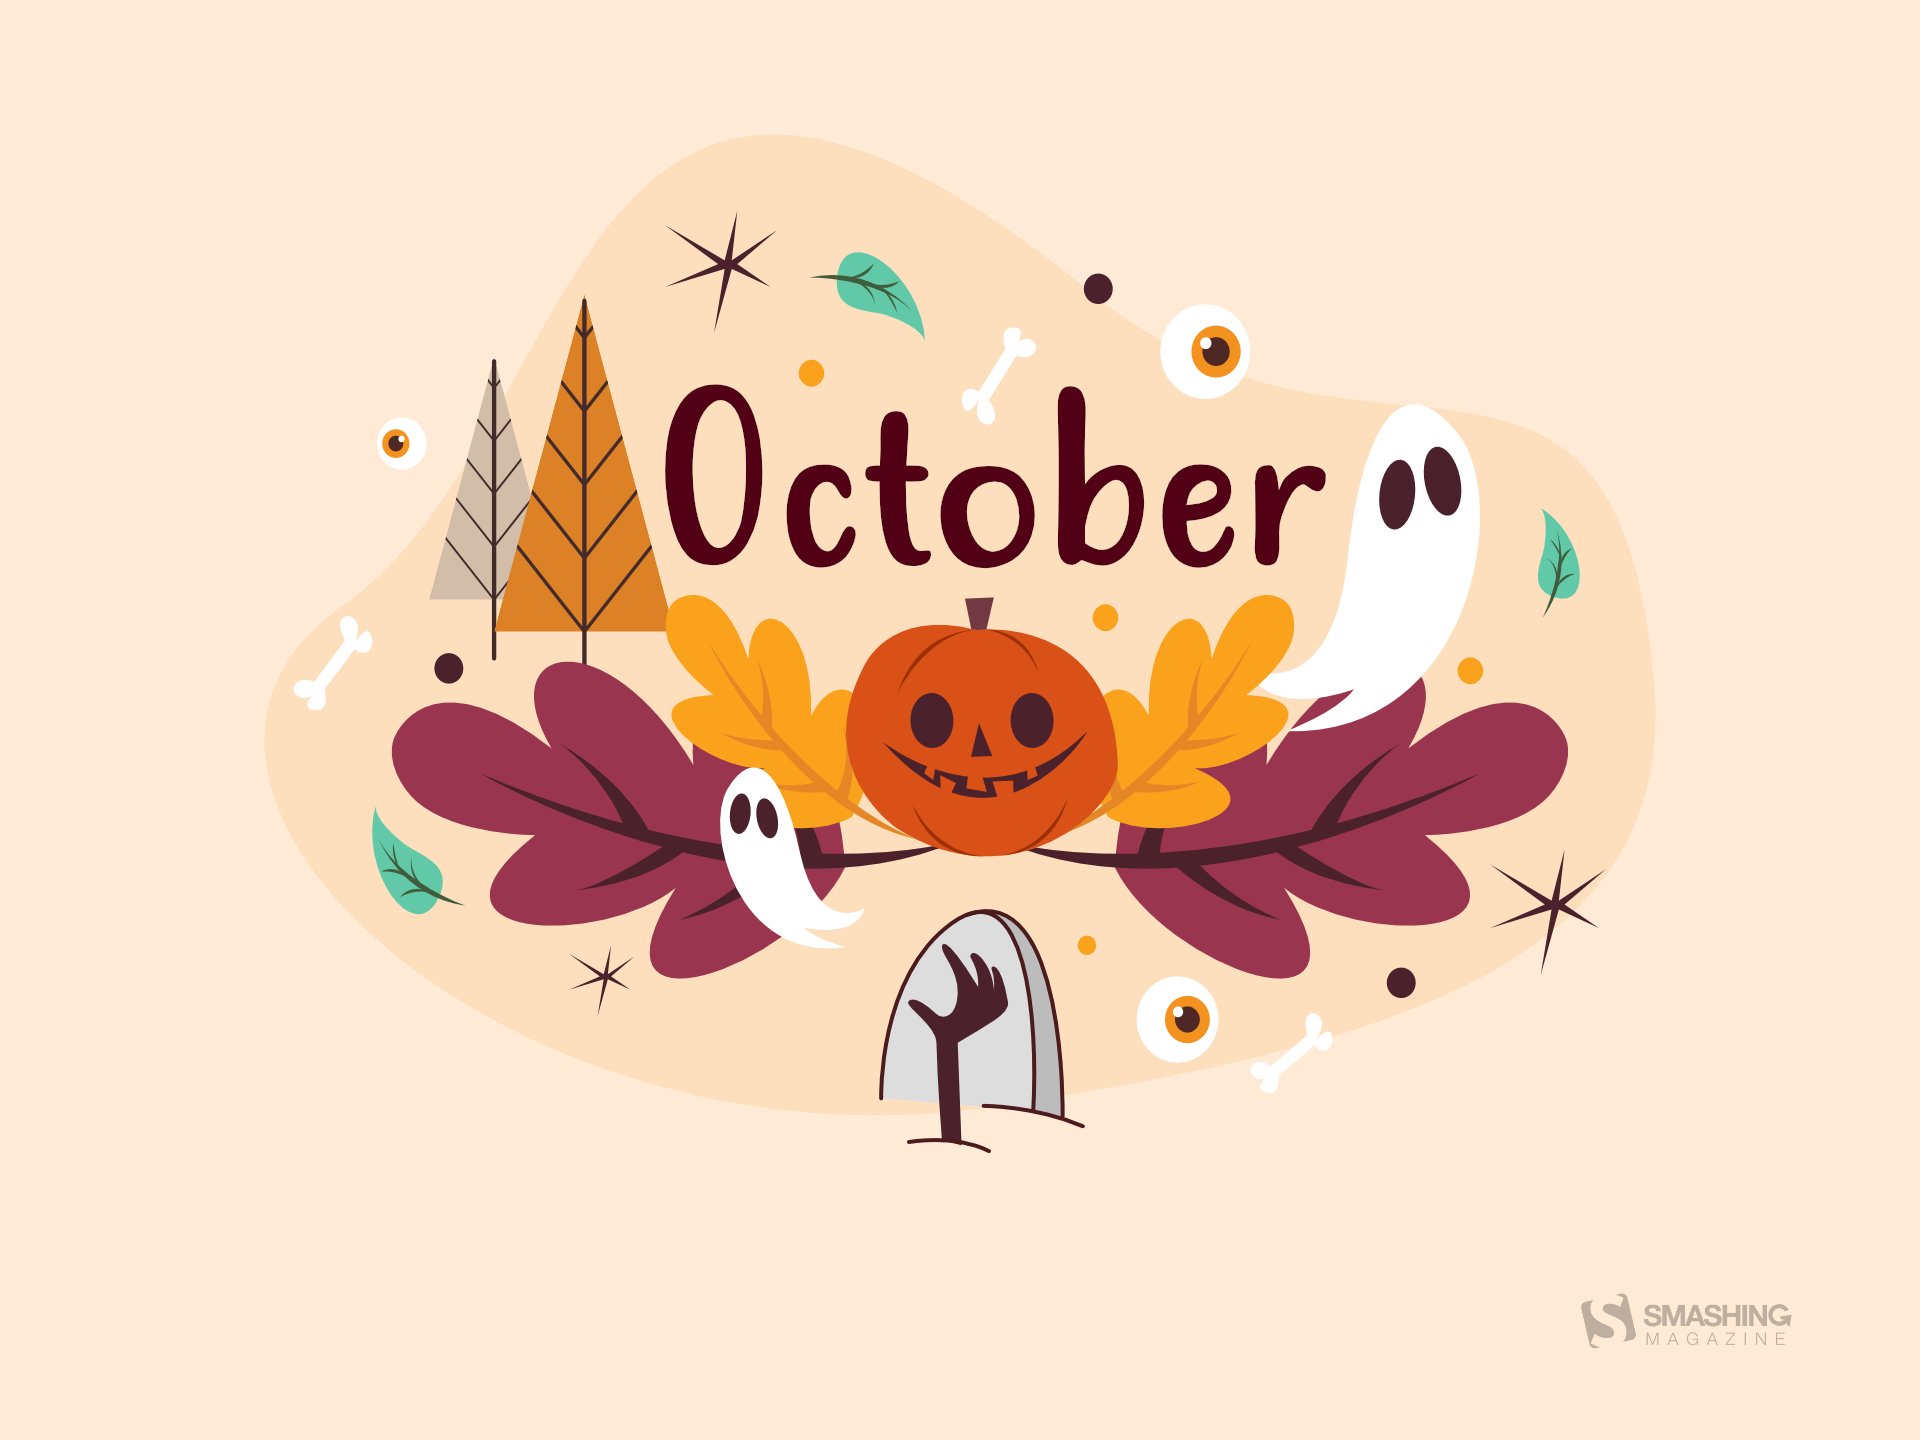 Pumpkins, Spooky Fellows And Fall Inspiration For Your Desktop (October 2017 Edition)